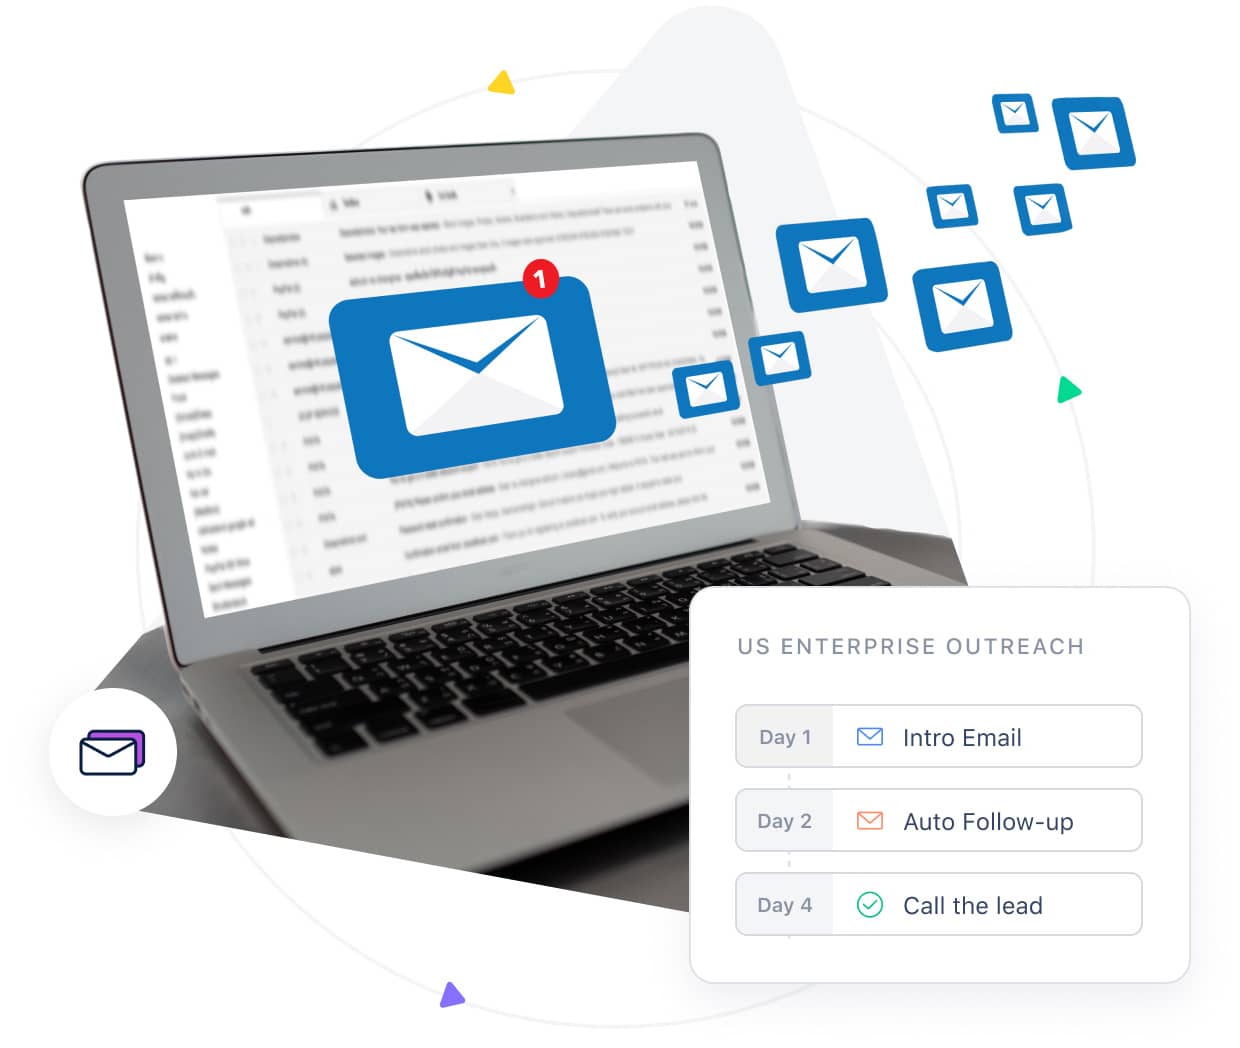 Build to create the best sales email sequences